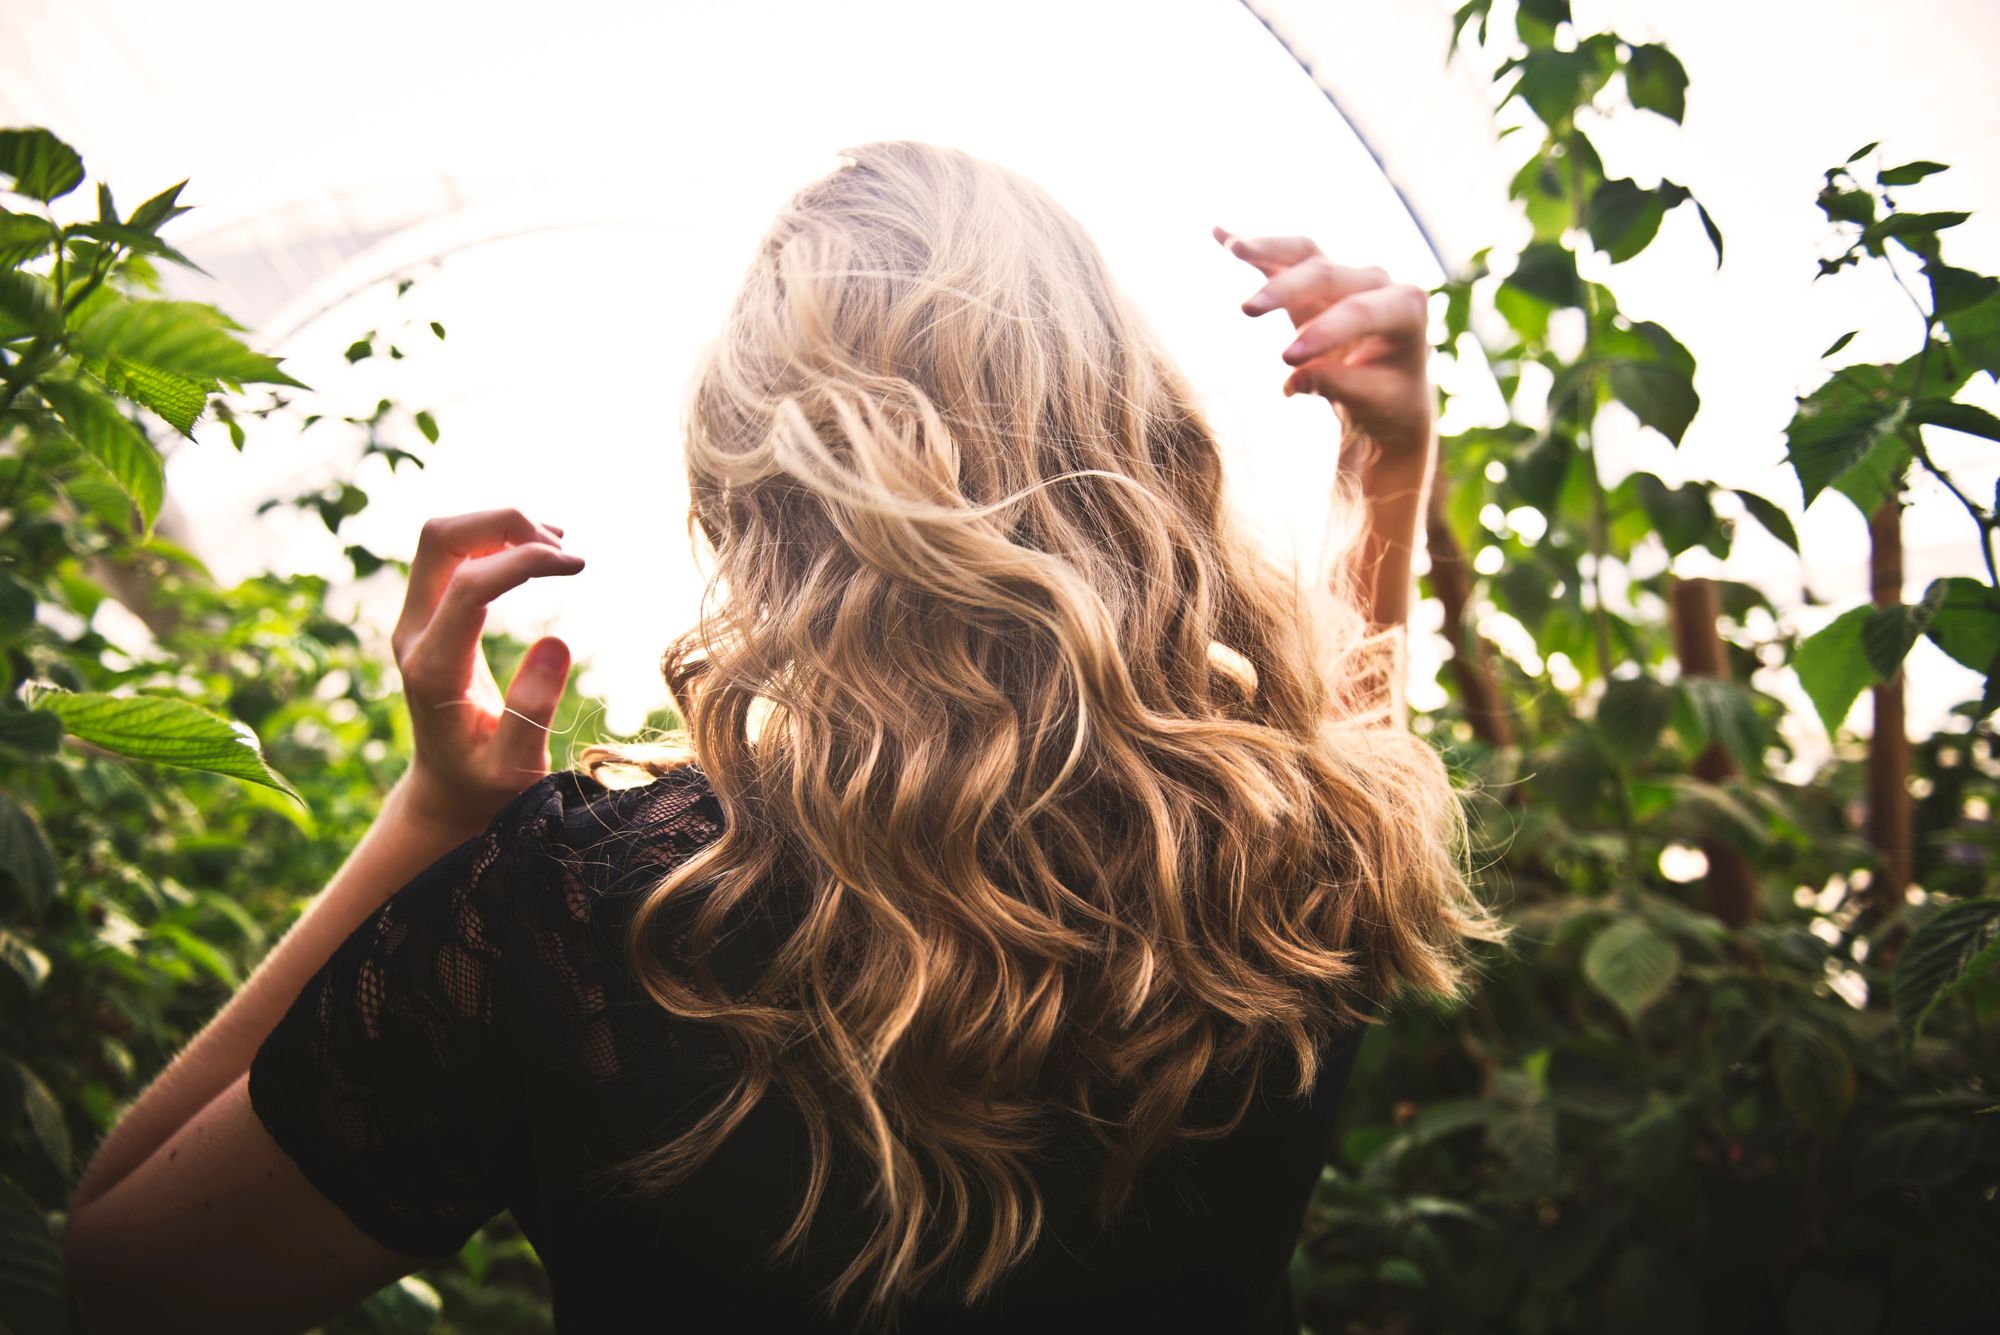 7 rules for healthy hair